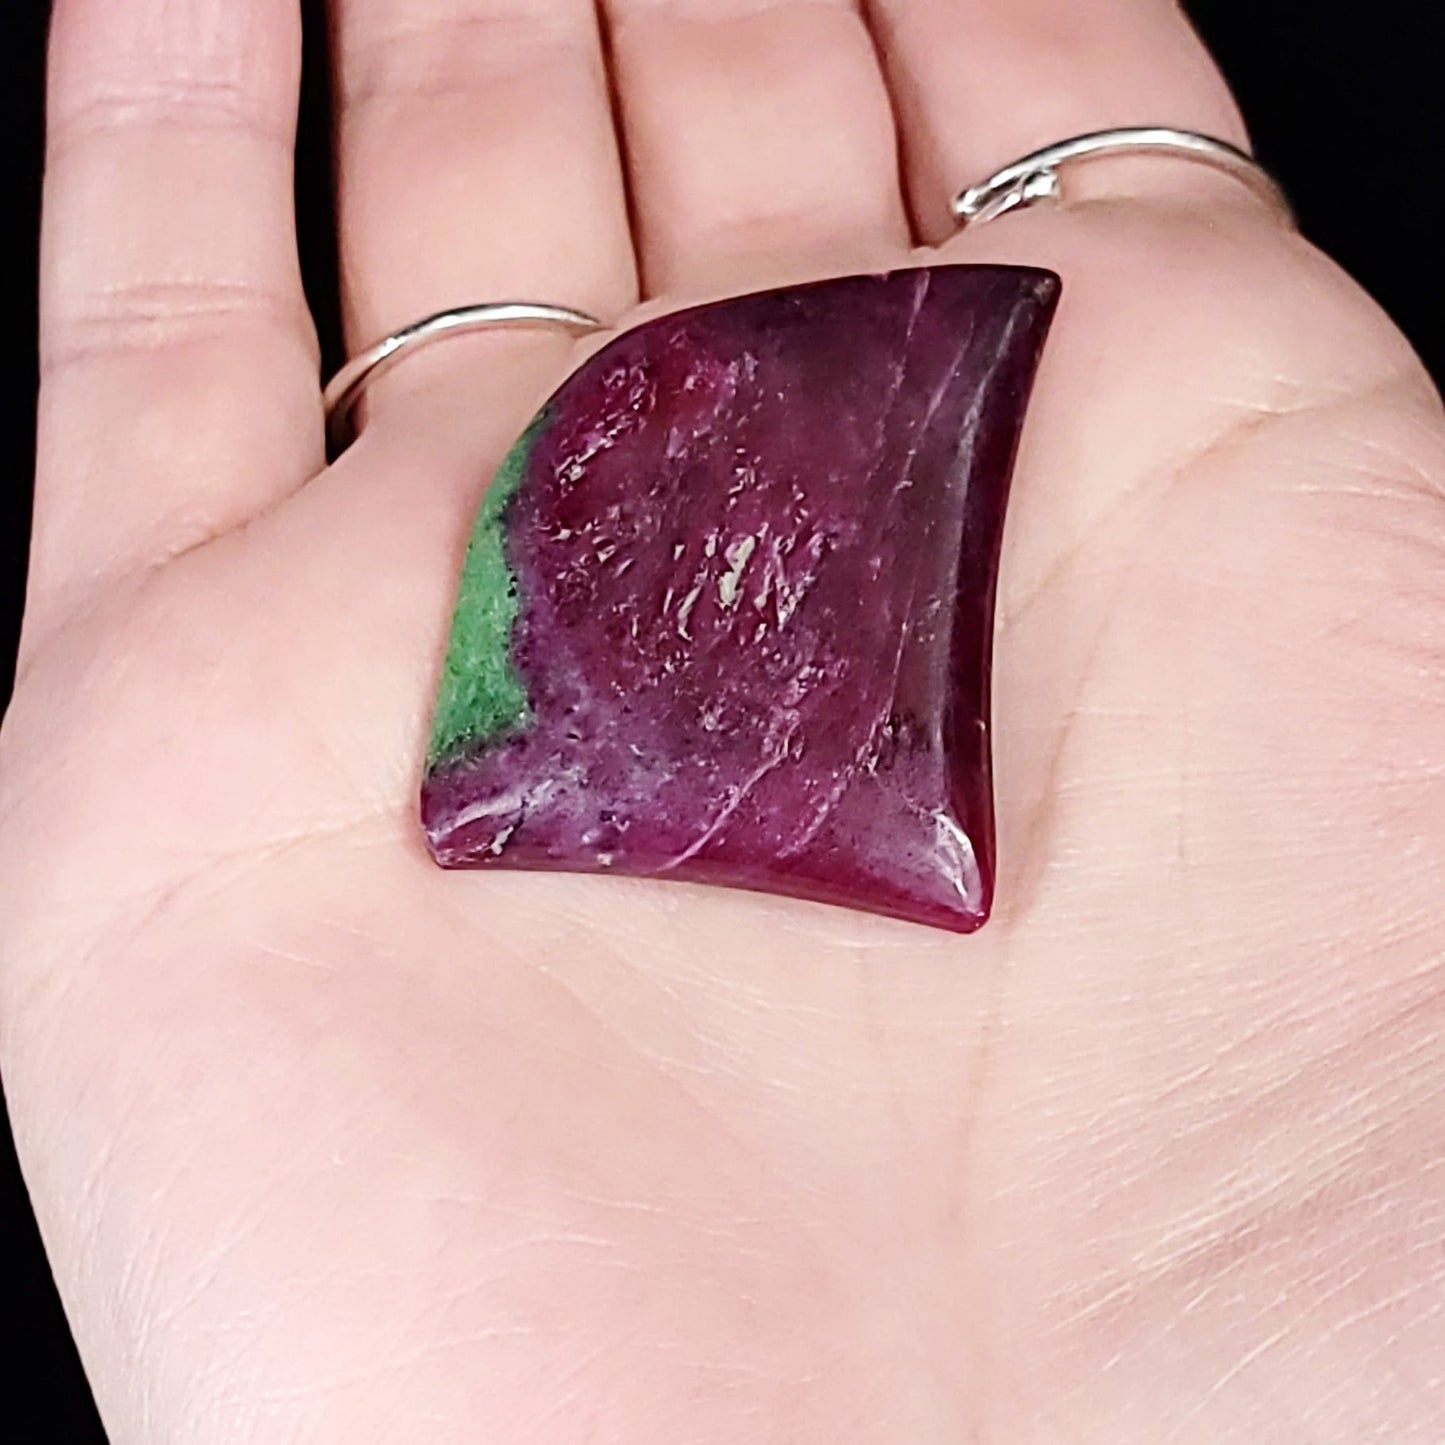 Ruby Zoisite Cabochon Free Form "Tooth" Polished Cut Stone - Elevated Metaphysical